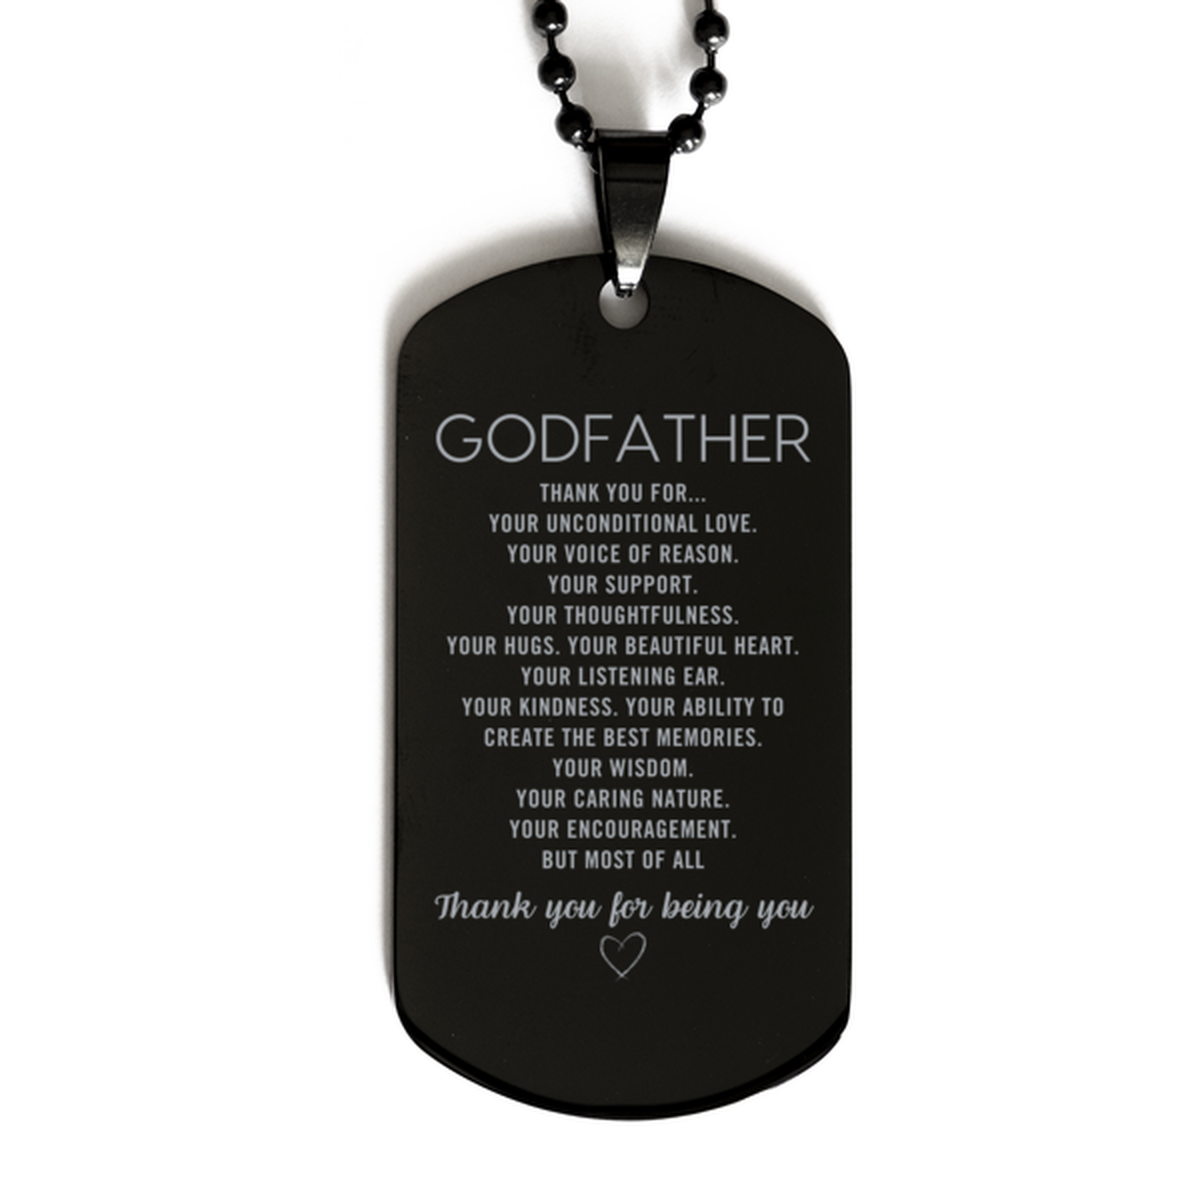 Godfather Black Dog Tag Custom, Engraved Gifts For Godfather Christmas Graduation Birthday Gifts for Men Women Godfather Thank you for Your unconditional love